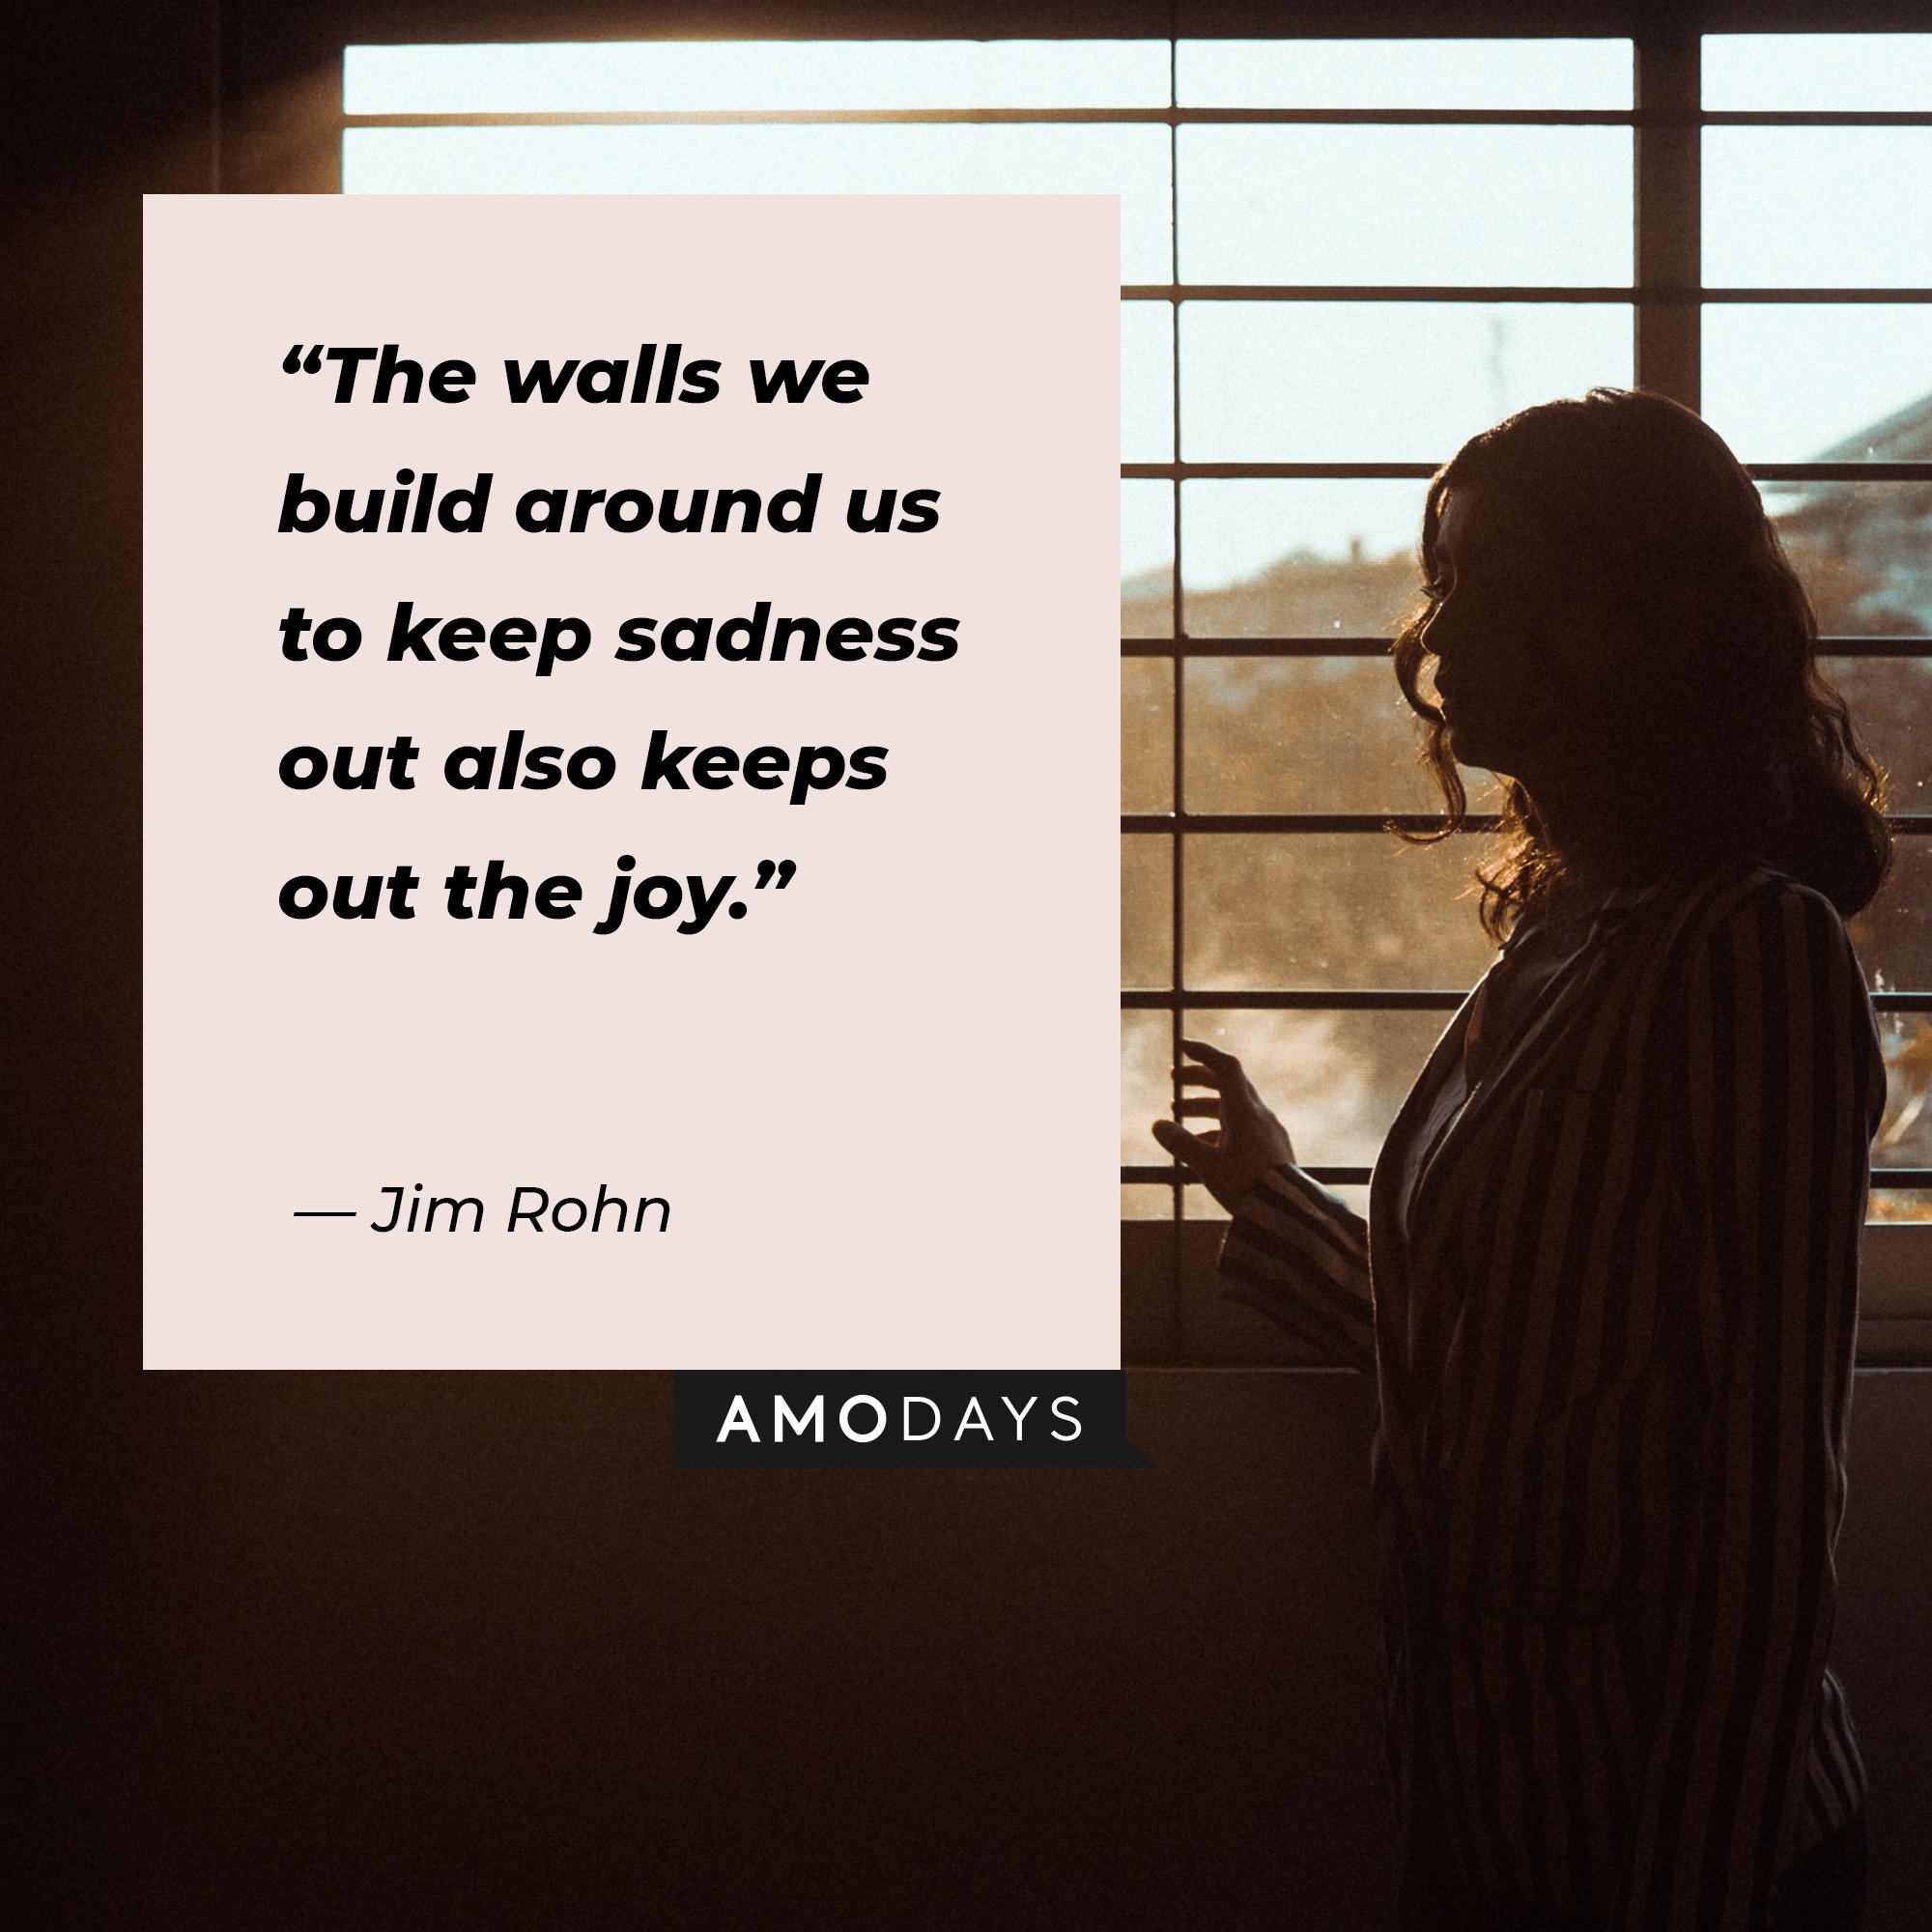 Jim Rohn’S quote: “The walls we build around us to keep sadness out also keeps out the joy.” | Image: AmoDays